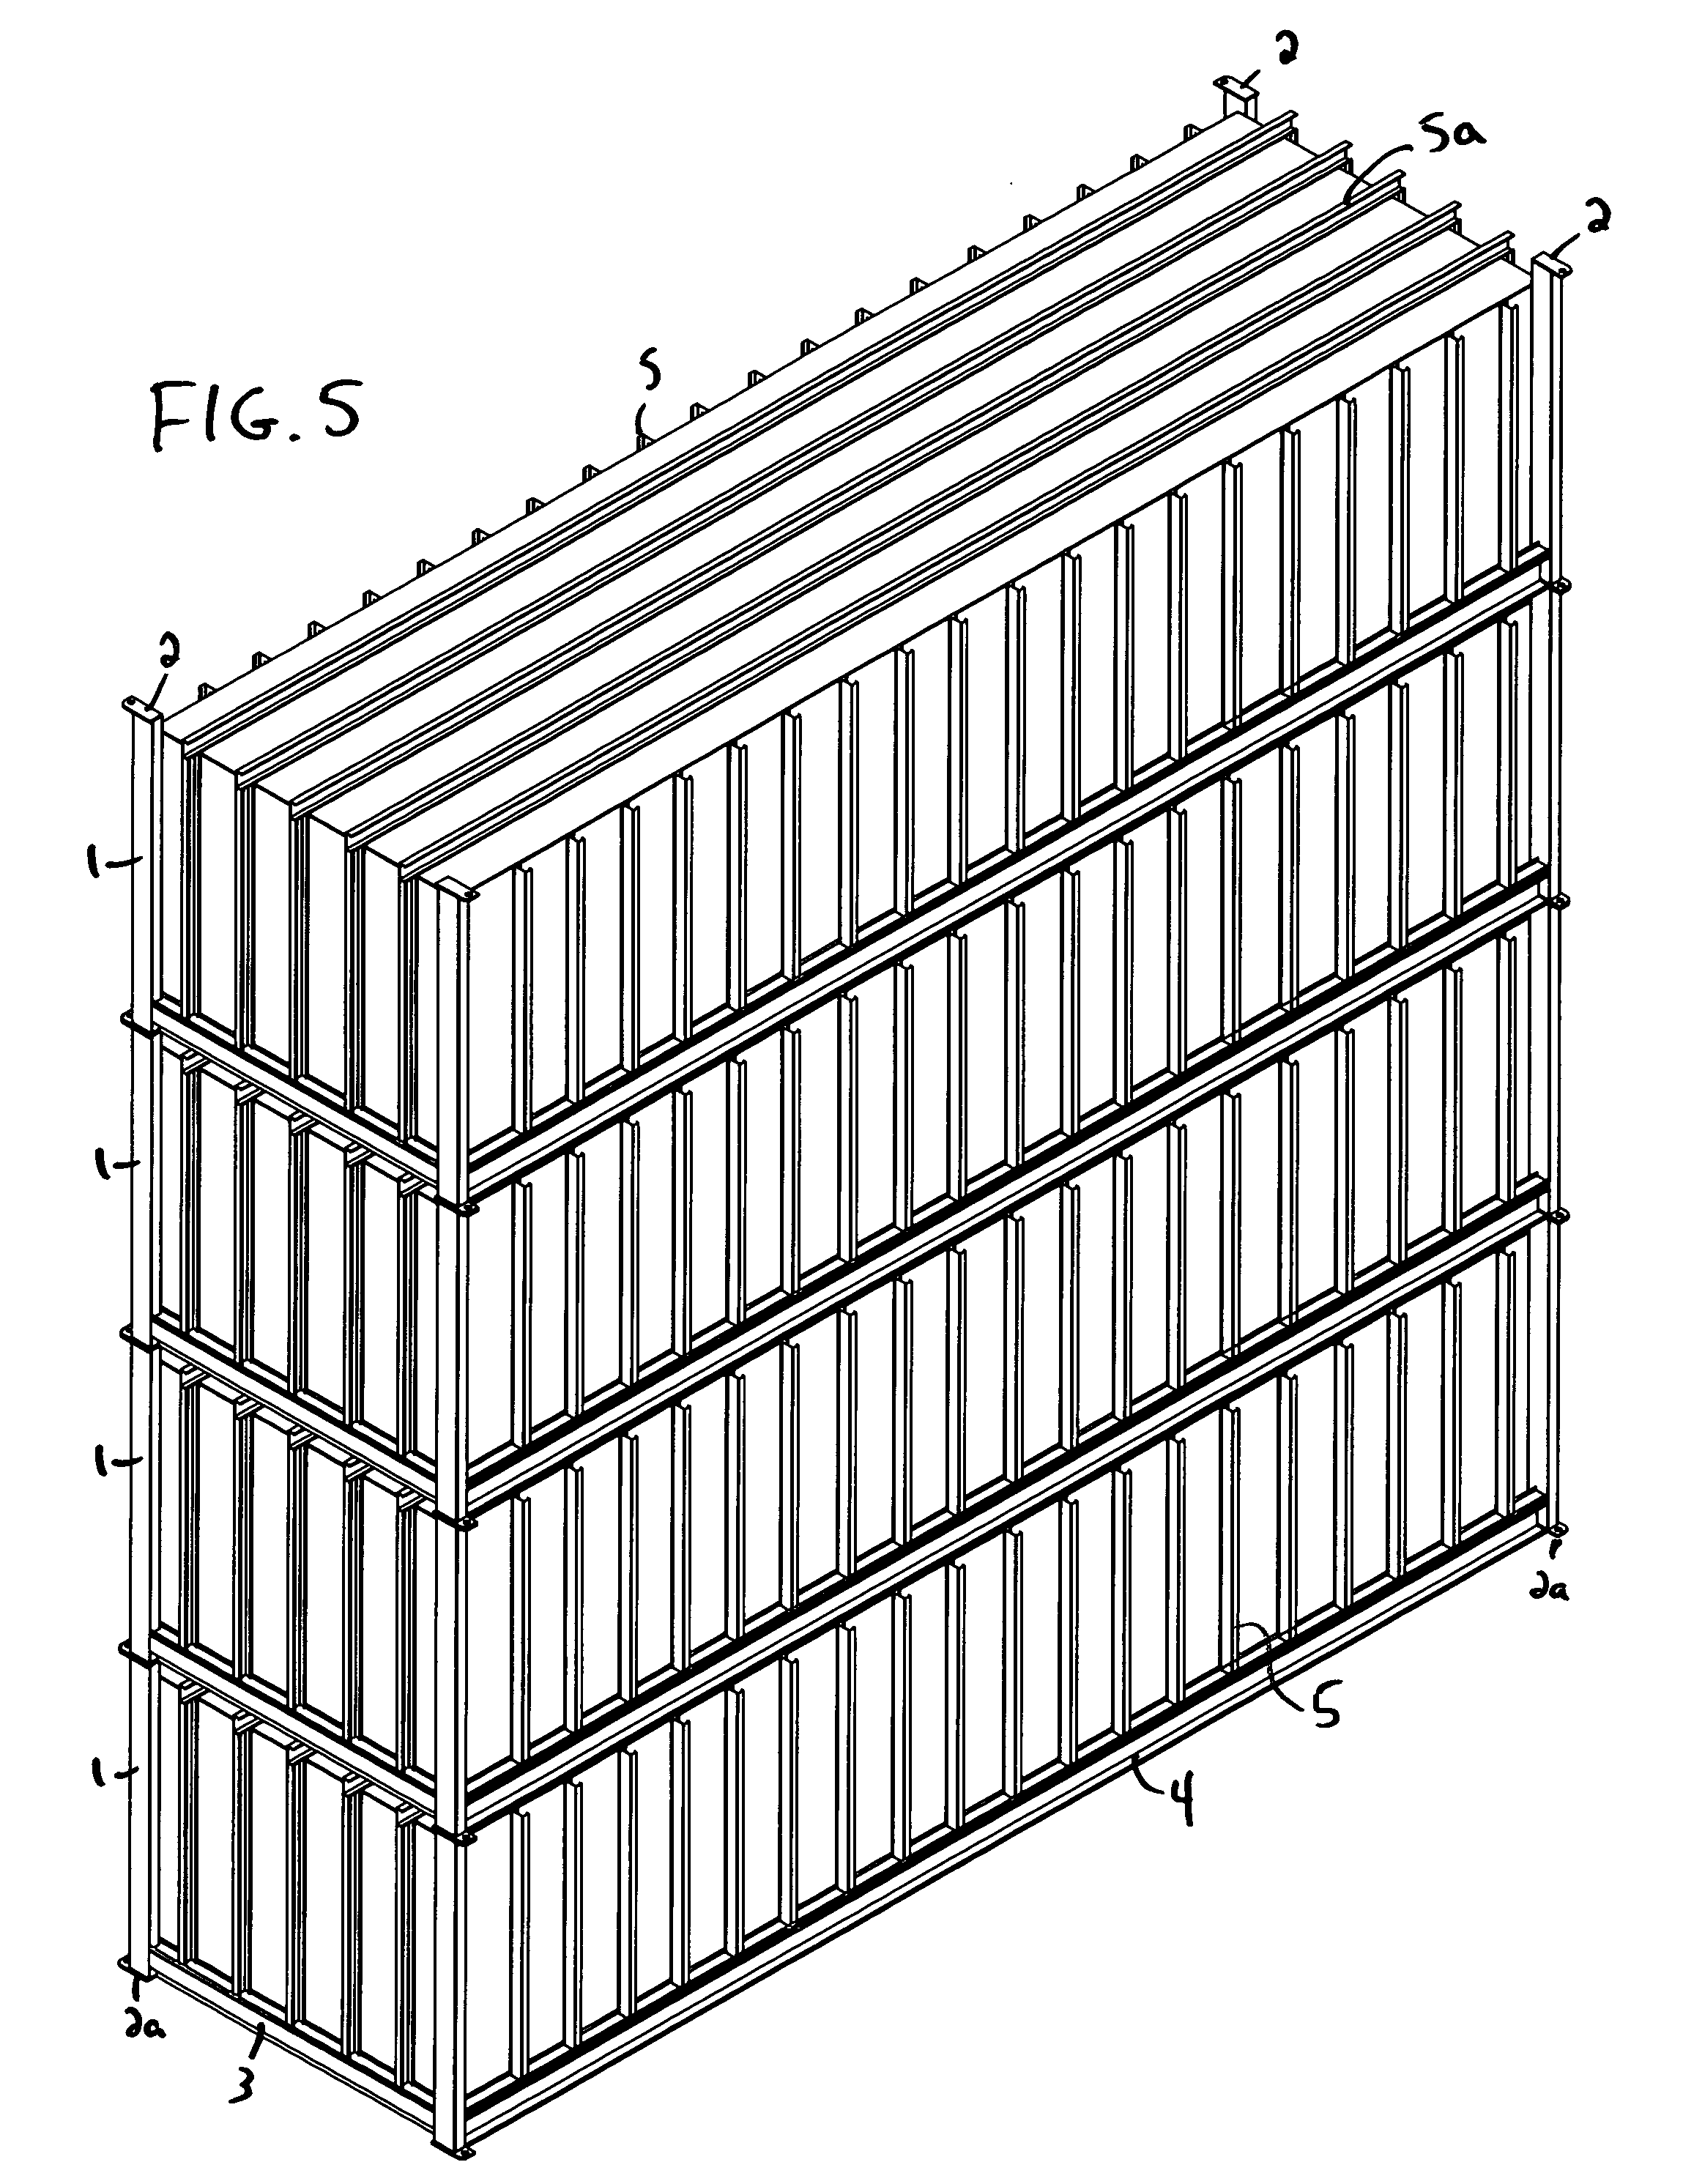 Load-bearing construction pod and hybrid method of construction using pods